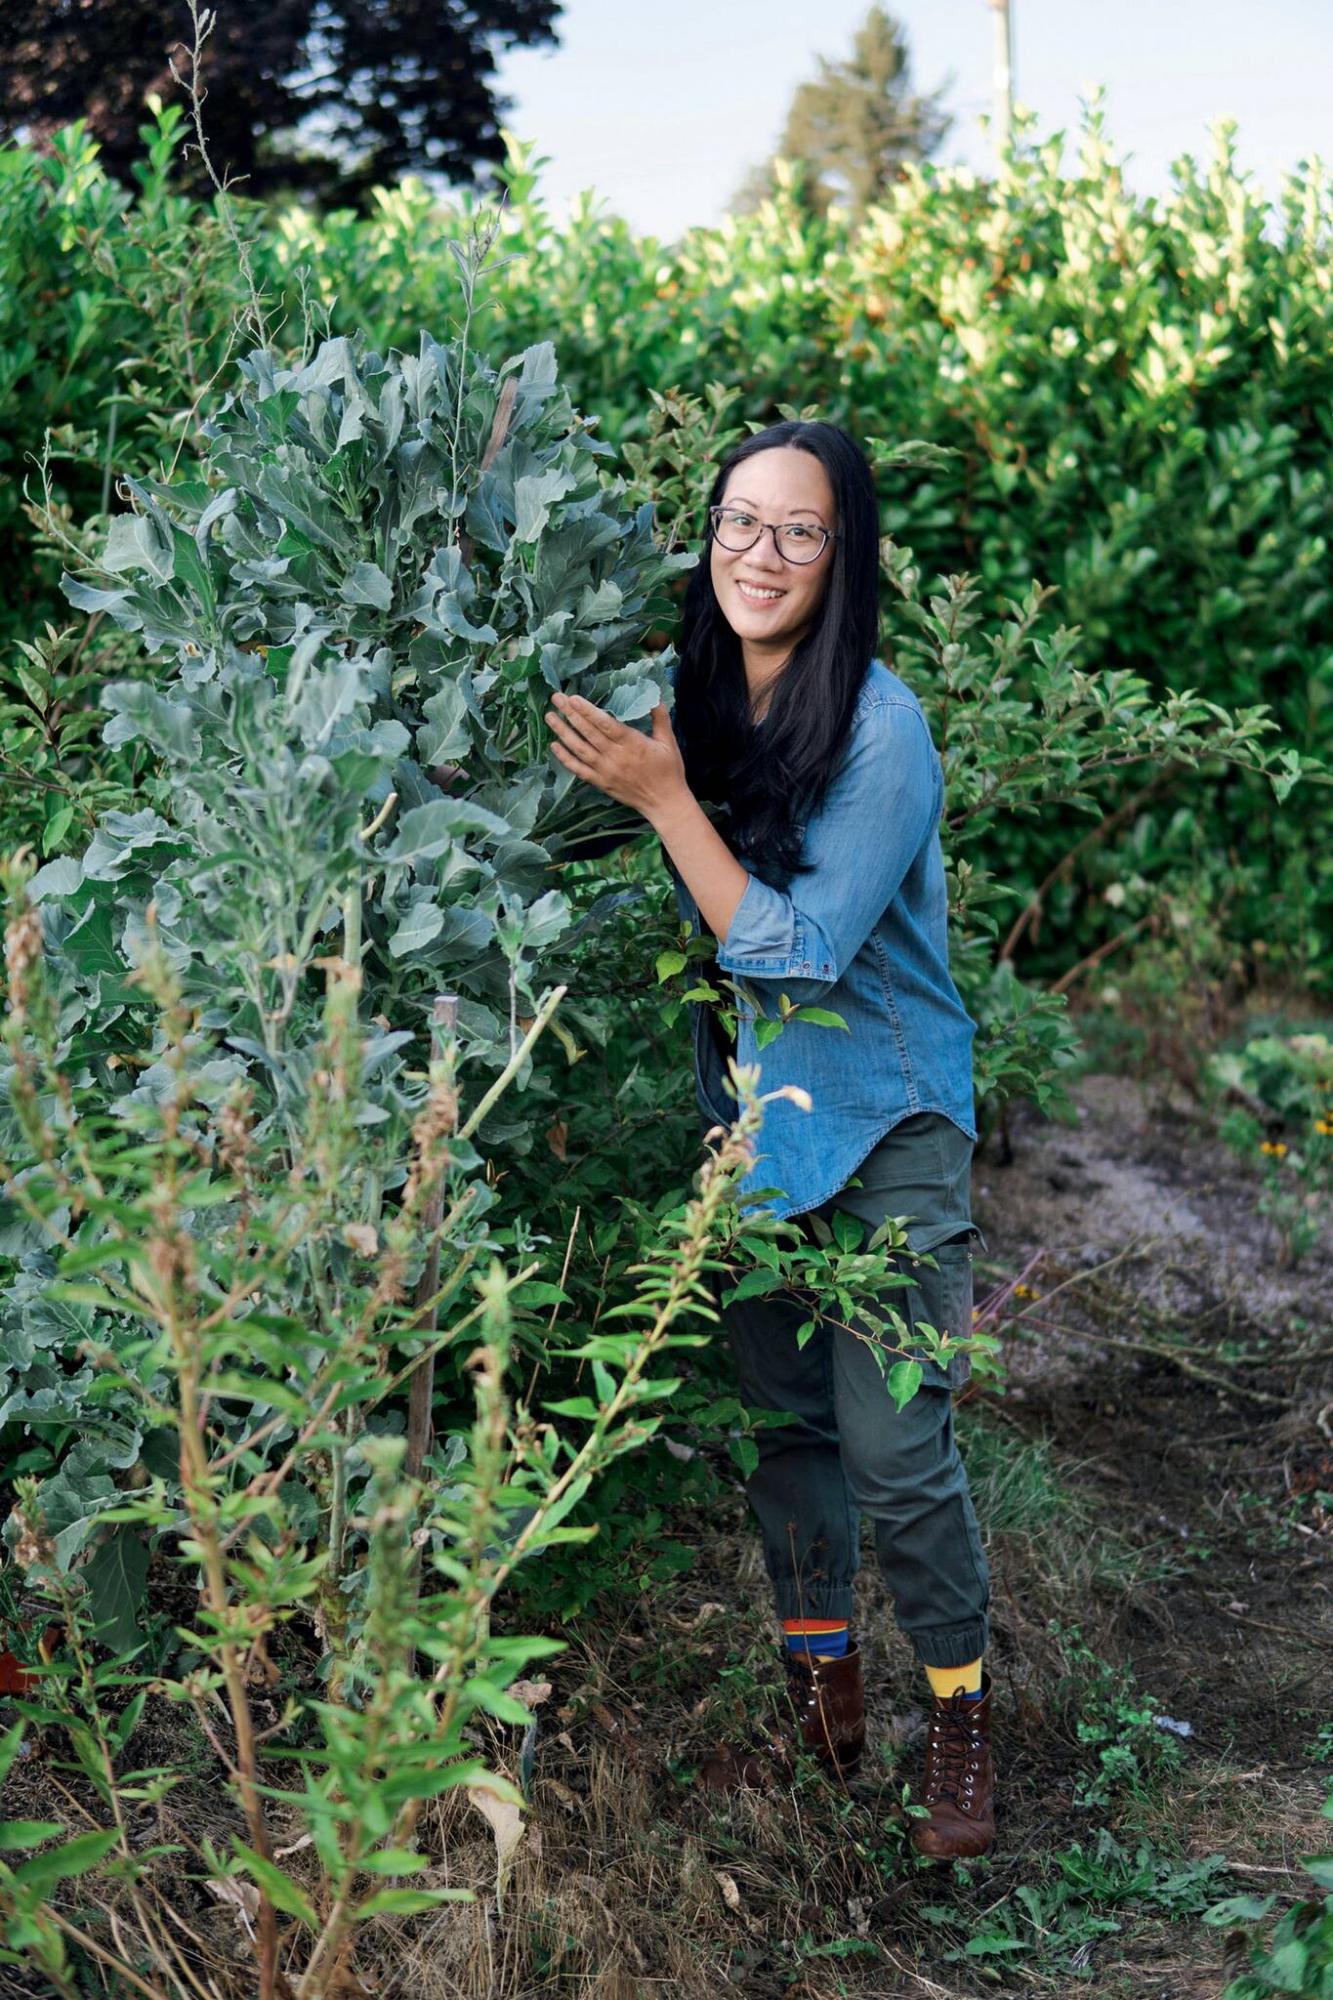  <p>Christina Chung</p>
                                <p>Christina Chung in her layered edible garden which has fewer weeds and few insect and disease problems.</p> 